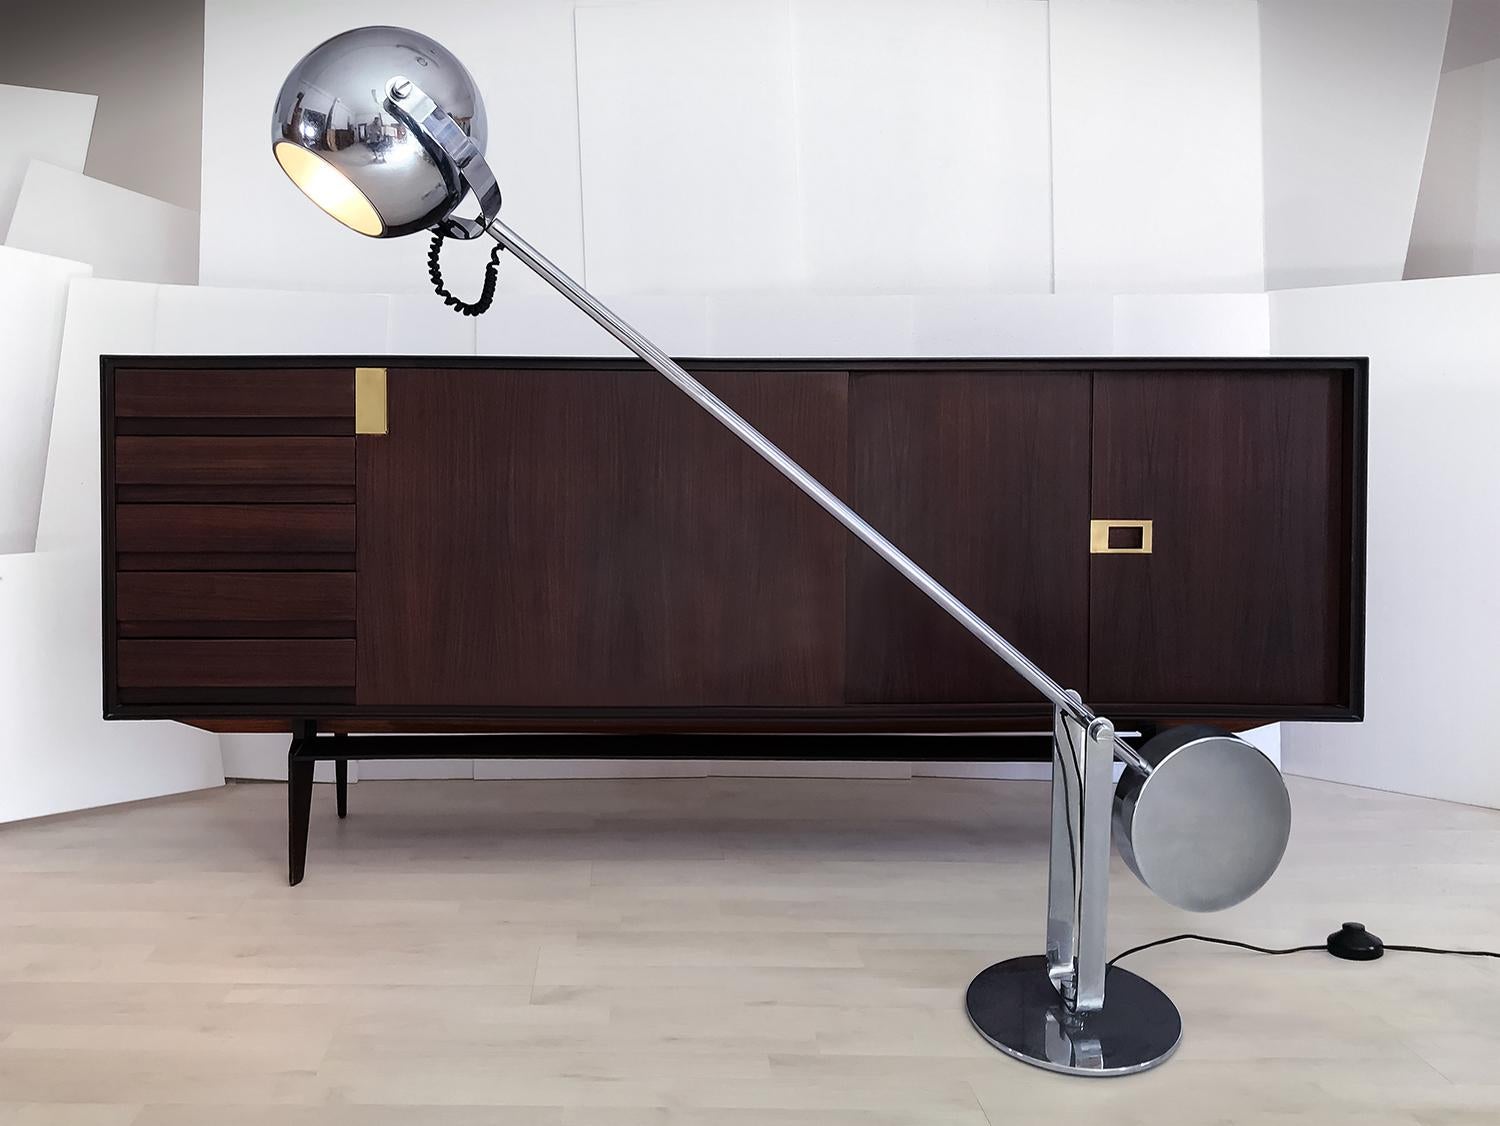 Stunning Italian adjustable floor lamp of the 1970s attributed to the design of Goffredo Reggiani.
This floor lamp has a round counter weight that creates perfect balance to adjust it.
Both basement as well the shade swivel, creating a very nice